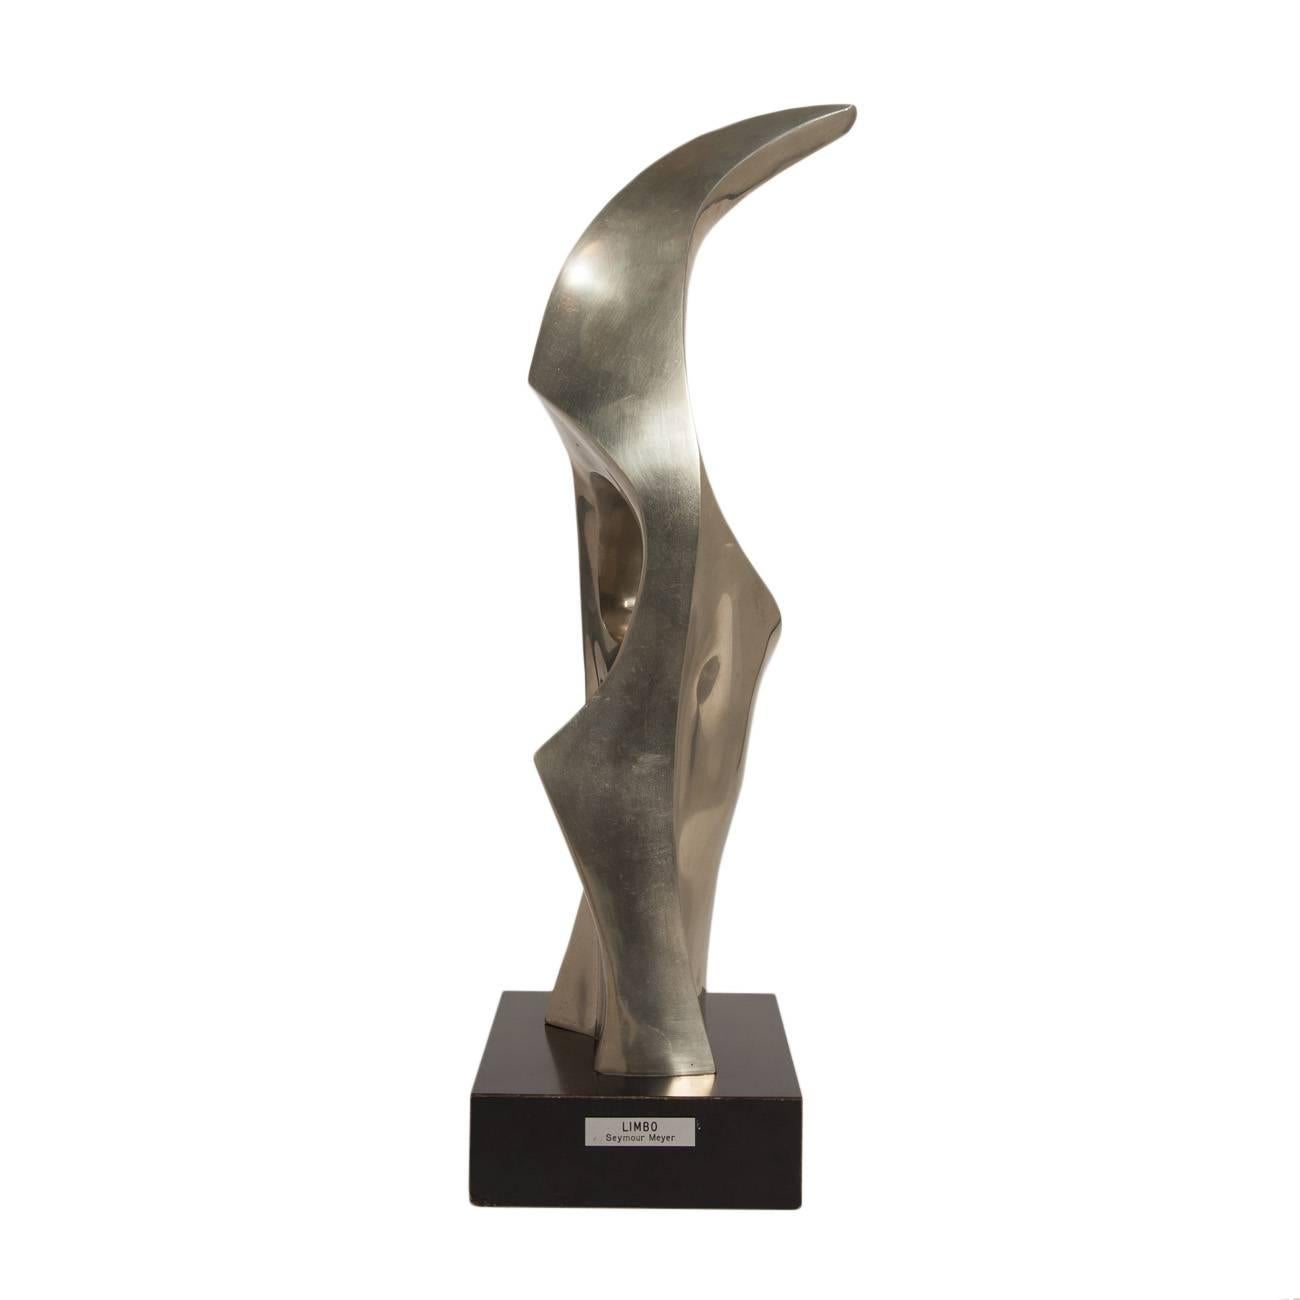 A magnificent abstract example of Seymour Meyer’s sculptural forms. This Mid-Century light bronze sculpture is signed by the artists and titled “Limbo”. Stands on an acrylic swivel base. Edition: 2/9. Item has to be crated for shipping because of